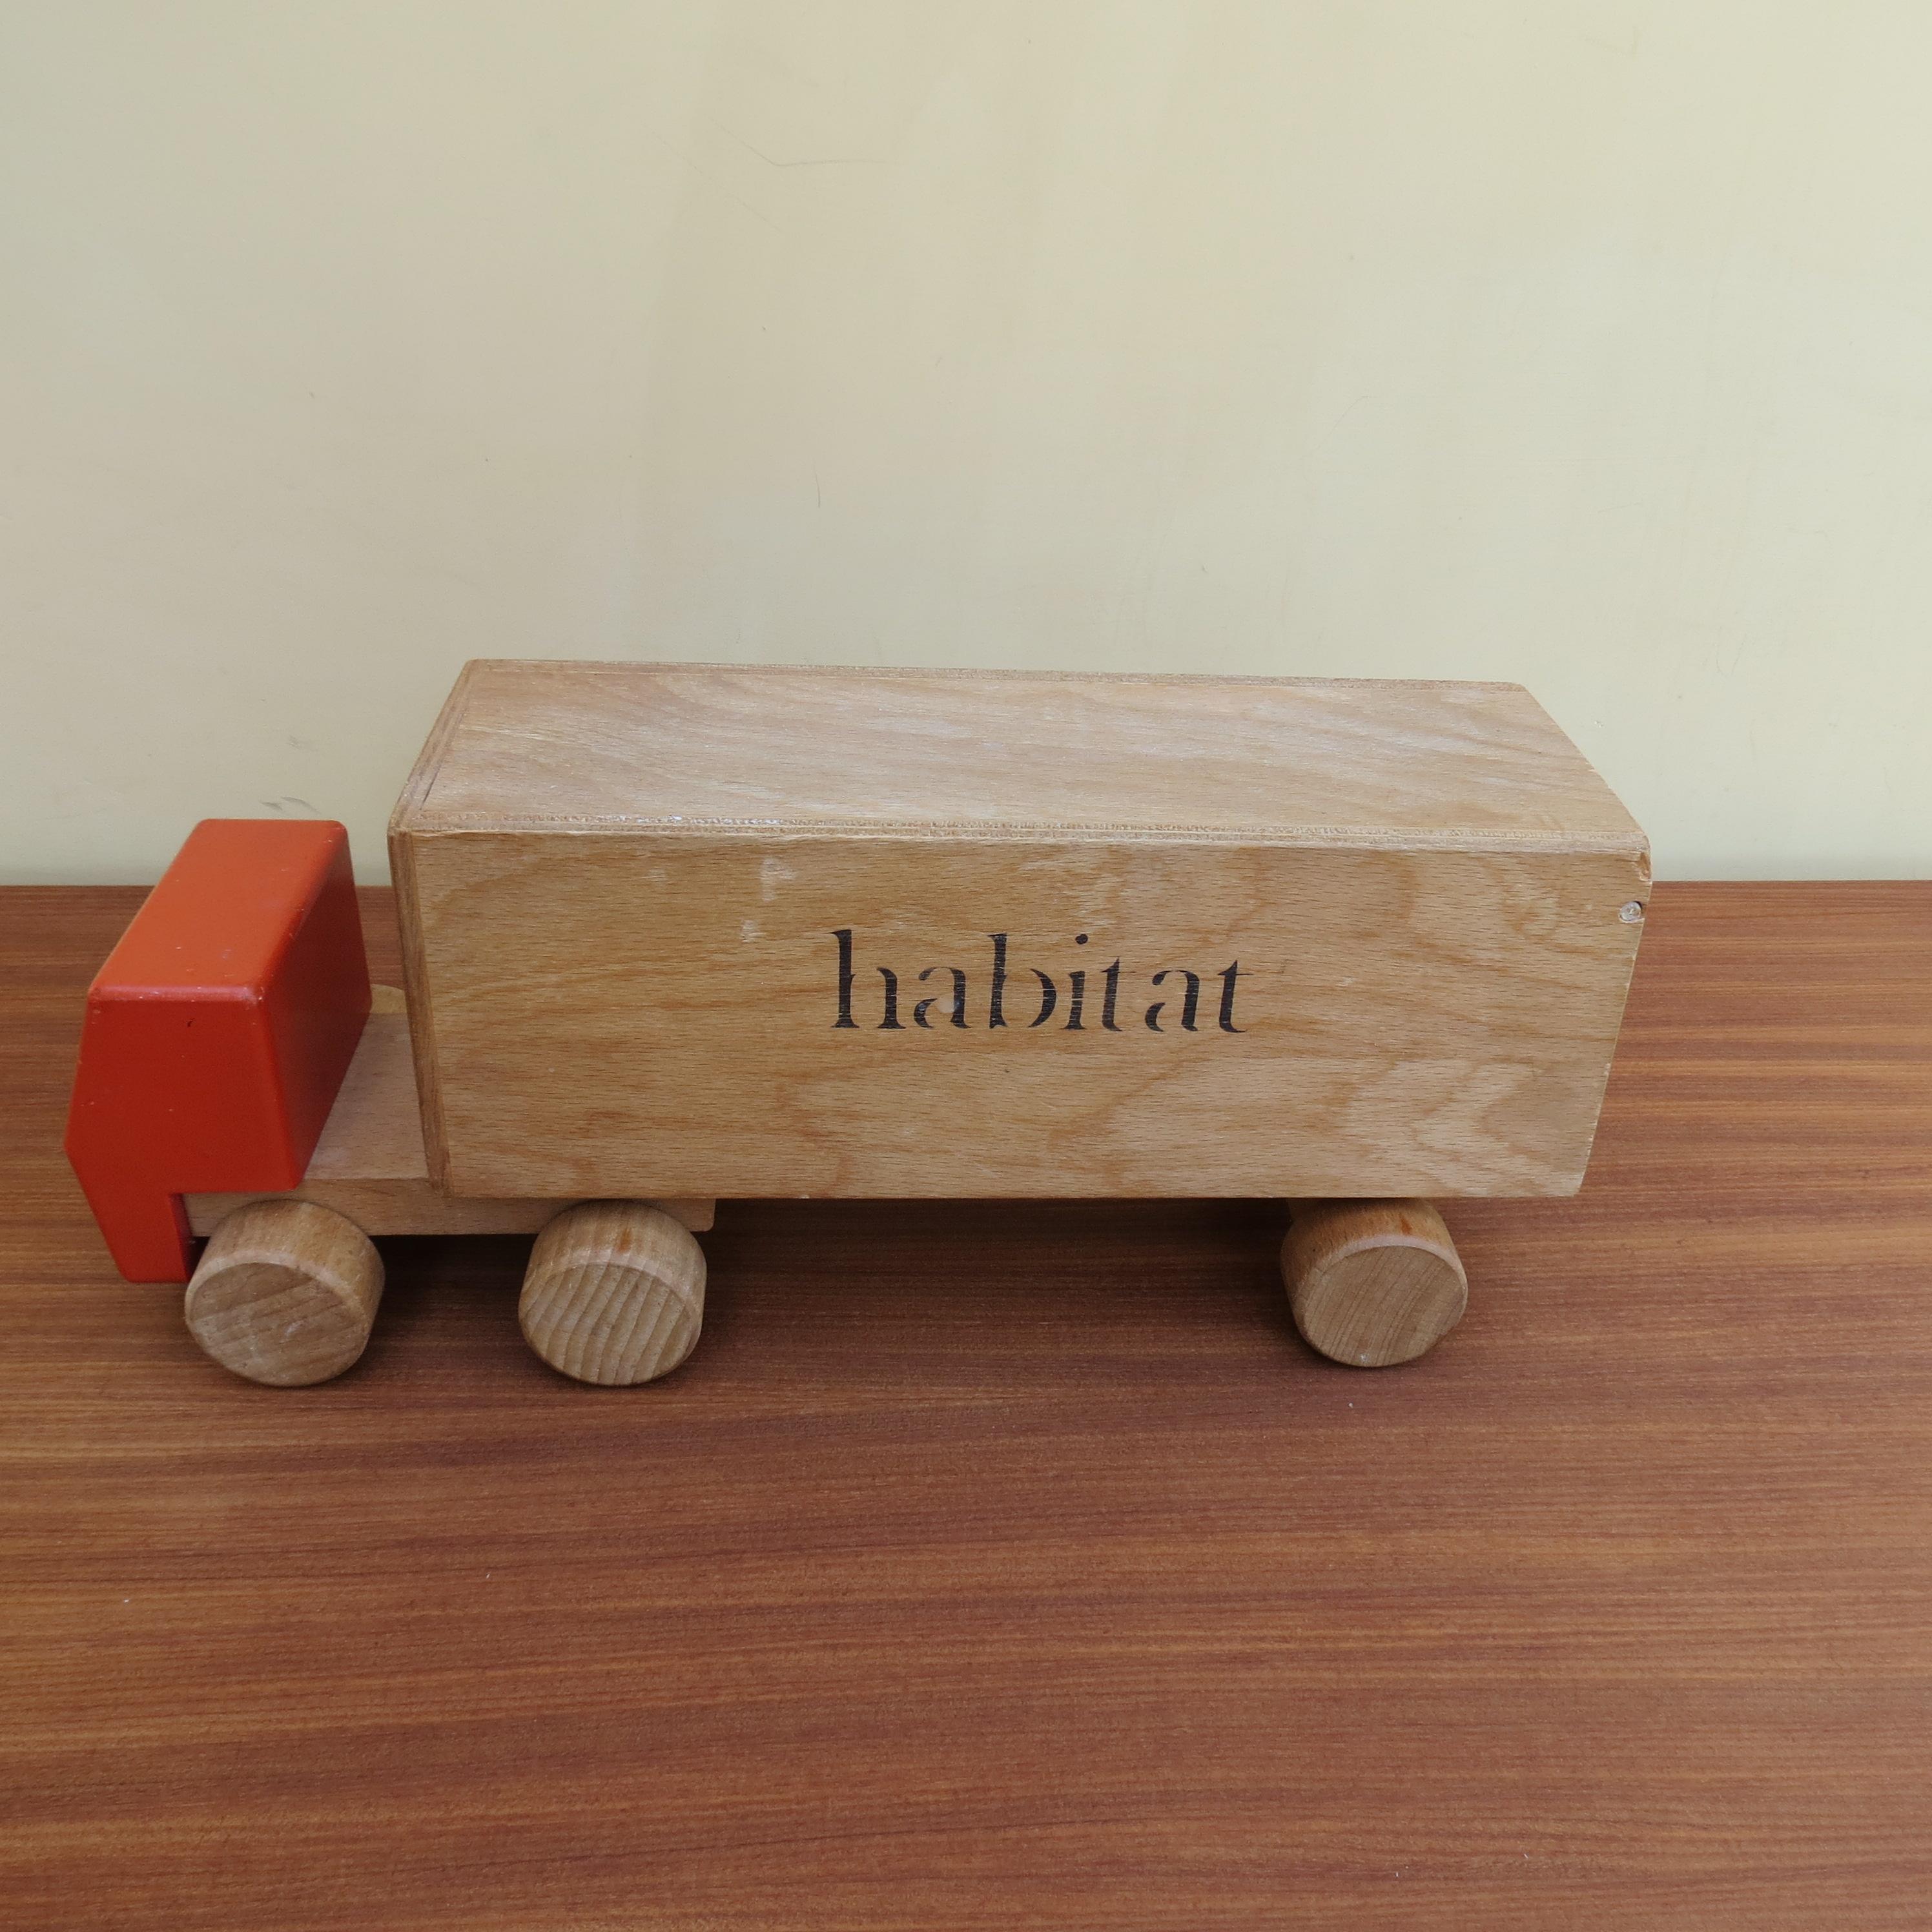 A wonderful toy lorry used for advertising Habitat. Dates from the 1970s. Made from wood and plywood. Painted wooden cab with pivoting trailer with opening tailgate. In good vintage condition, stamped Habitat to the side of the lorry. Stamped Made